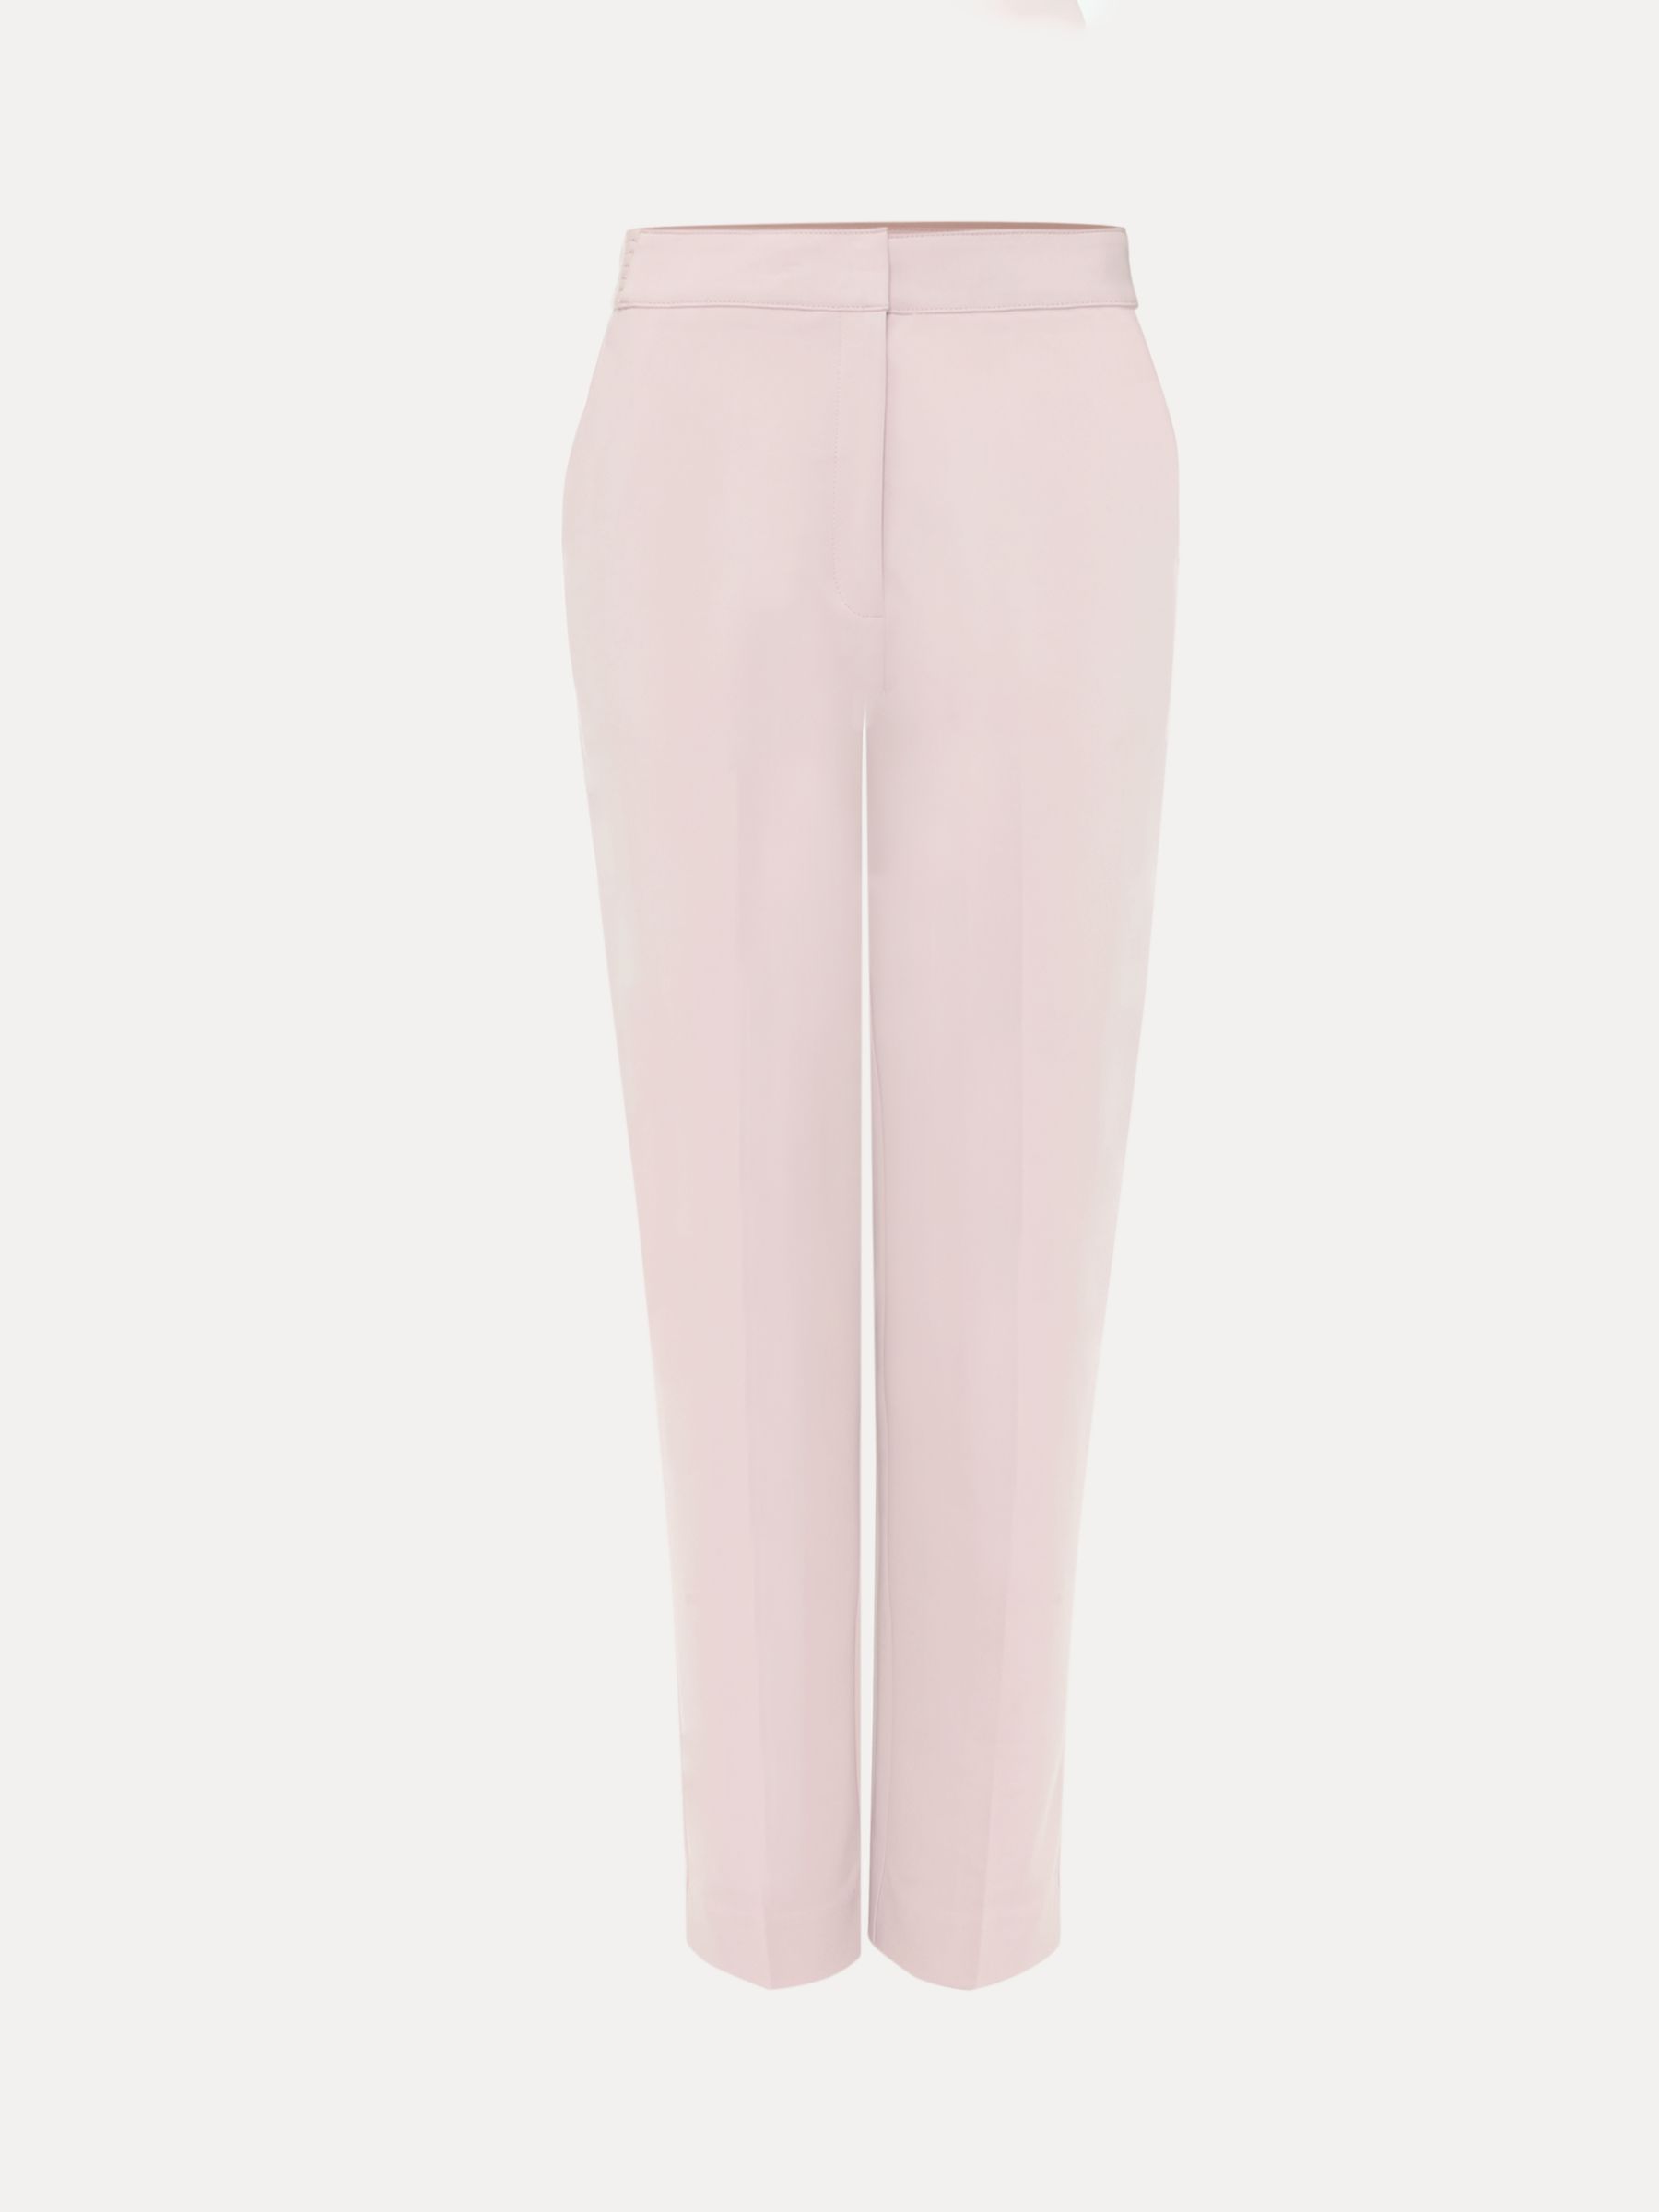 Buy Phase Eight Ulrica Suit Trouser, Antique Rose Online at johnlewis.com